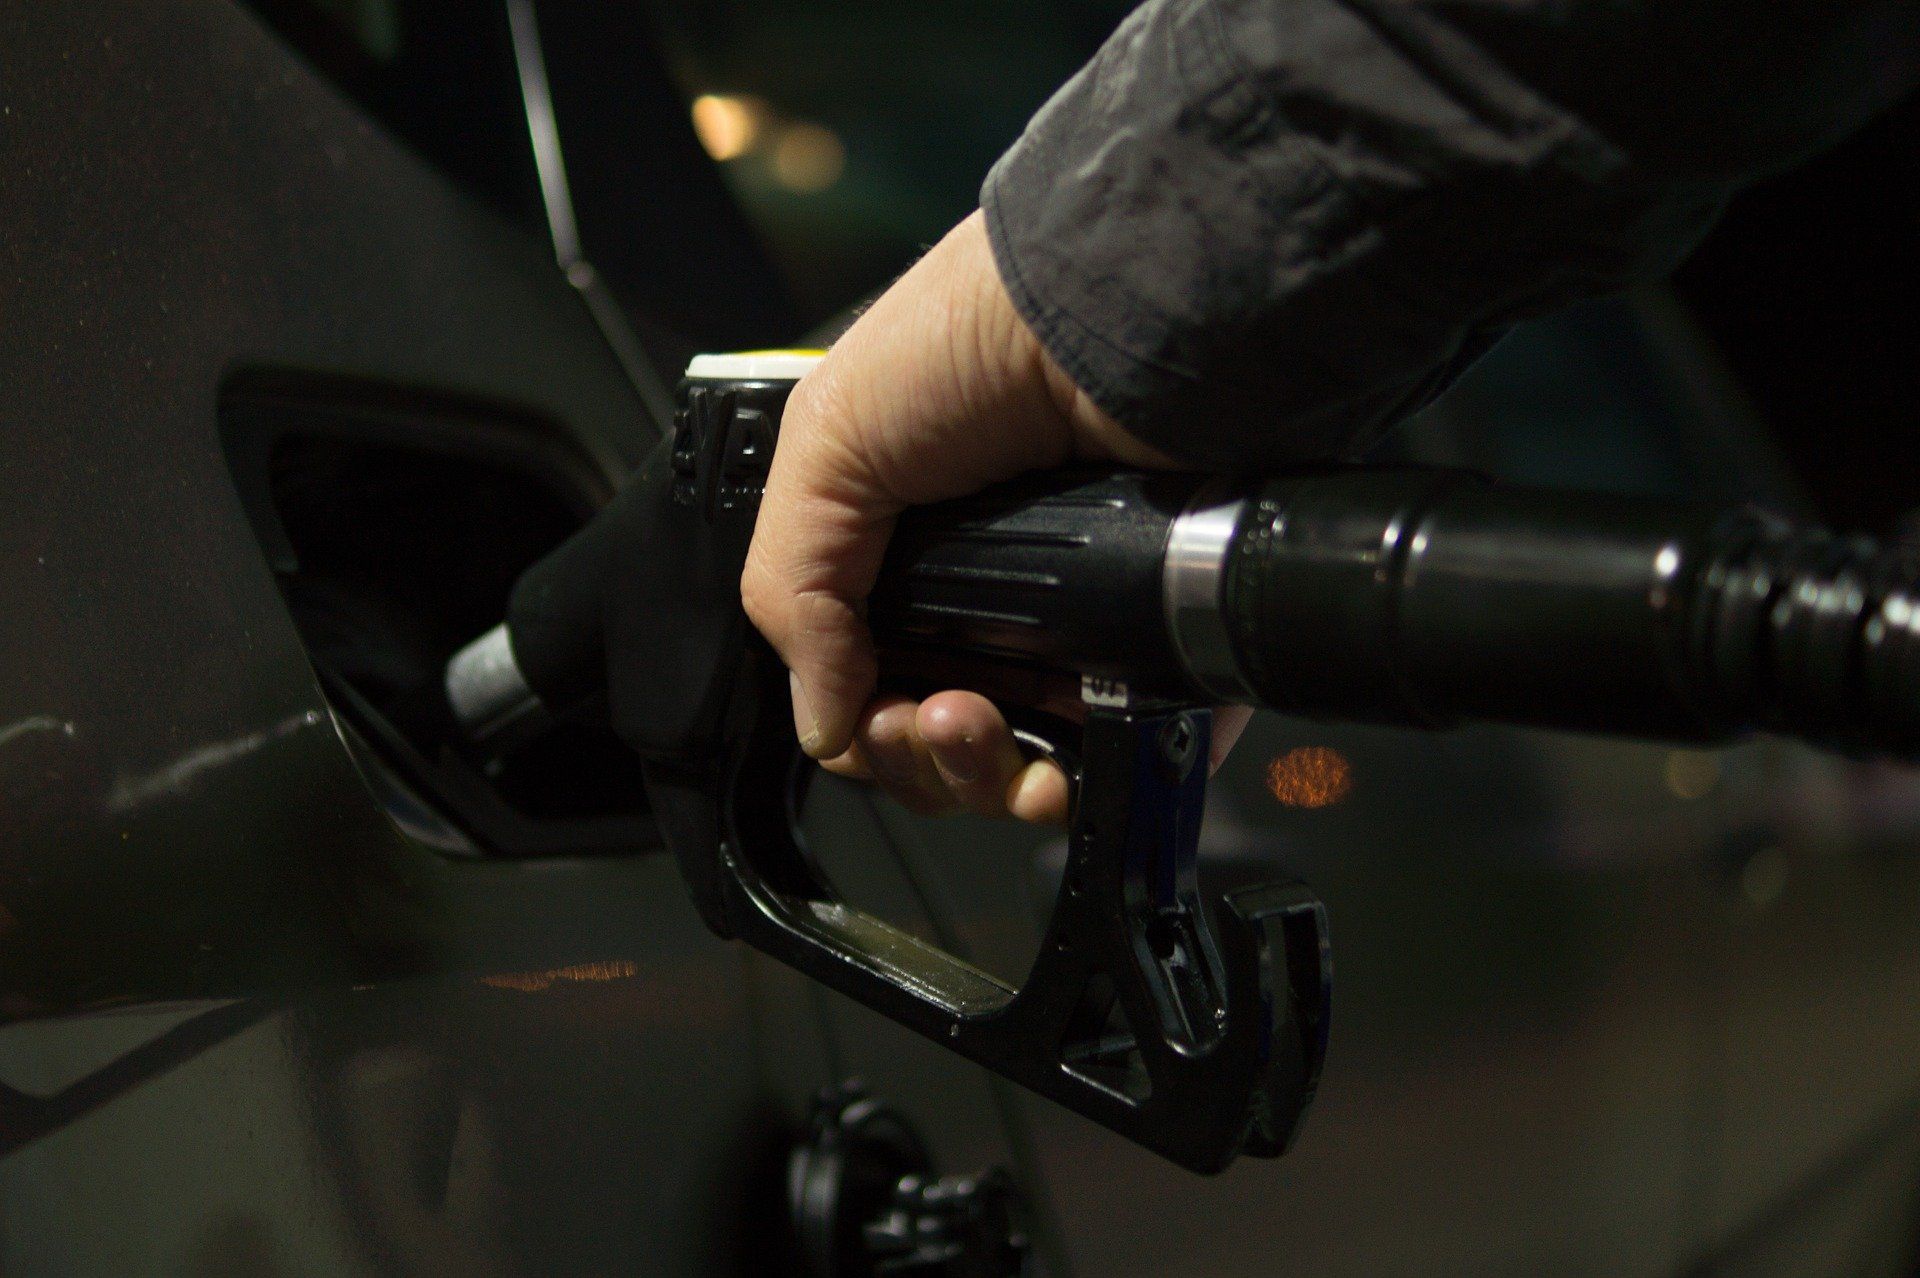 Fuel prices: Petrol priced at Rs 95.41, diesel Rs 86.67 in Delhi on February 15, 2022